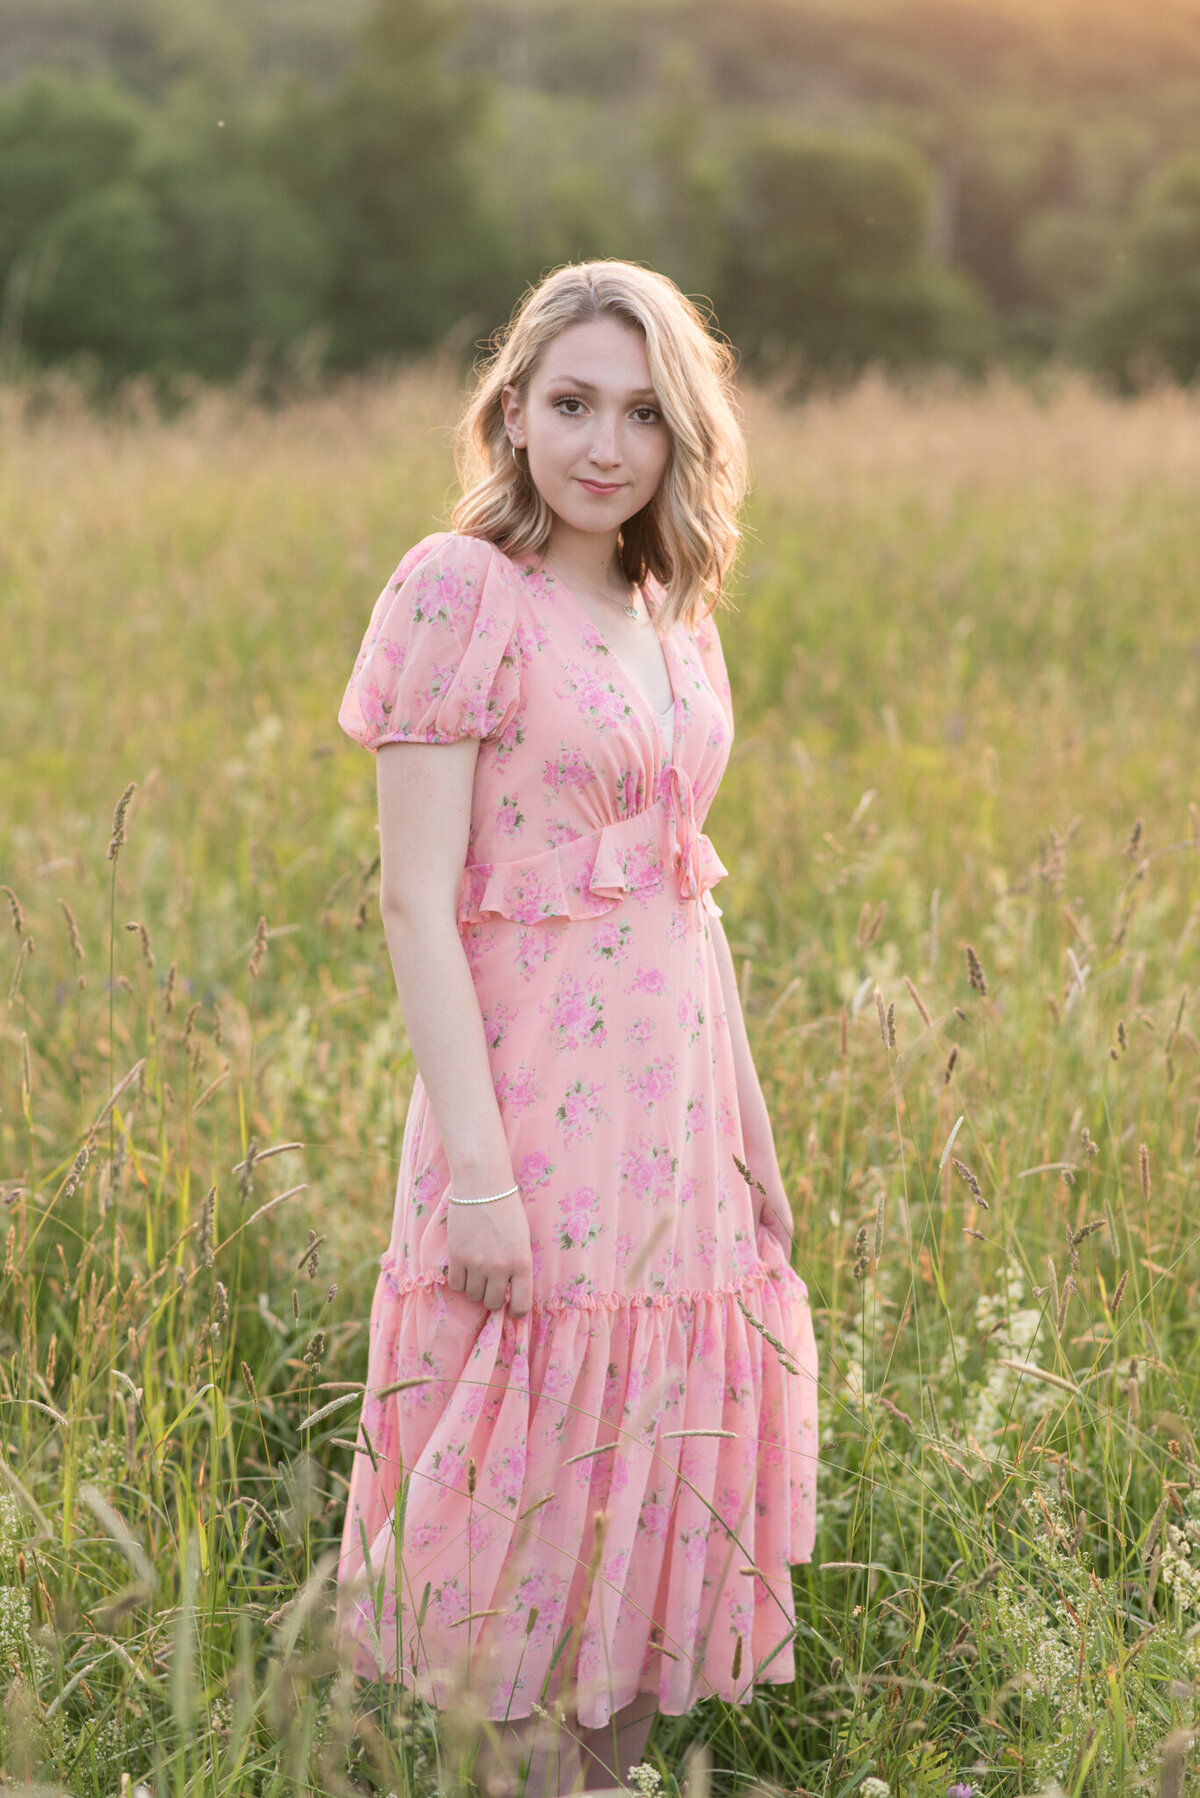 Girl in pink dress standing in field of tall green grass